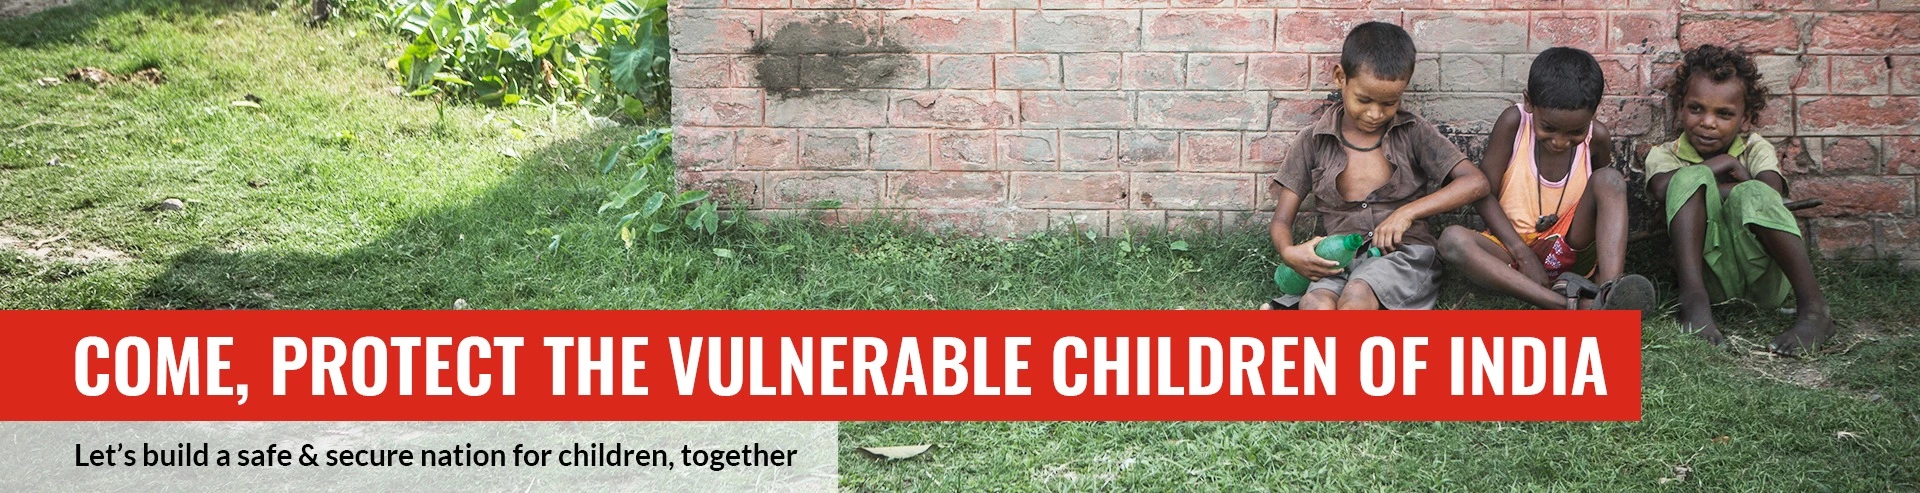 Child Protection Services | Save the Children